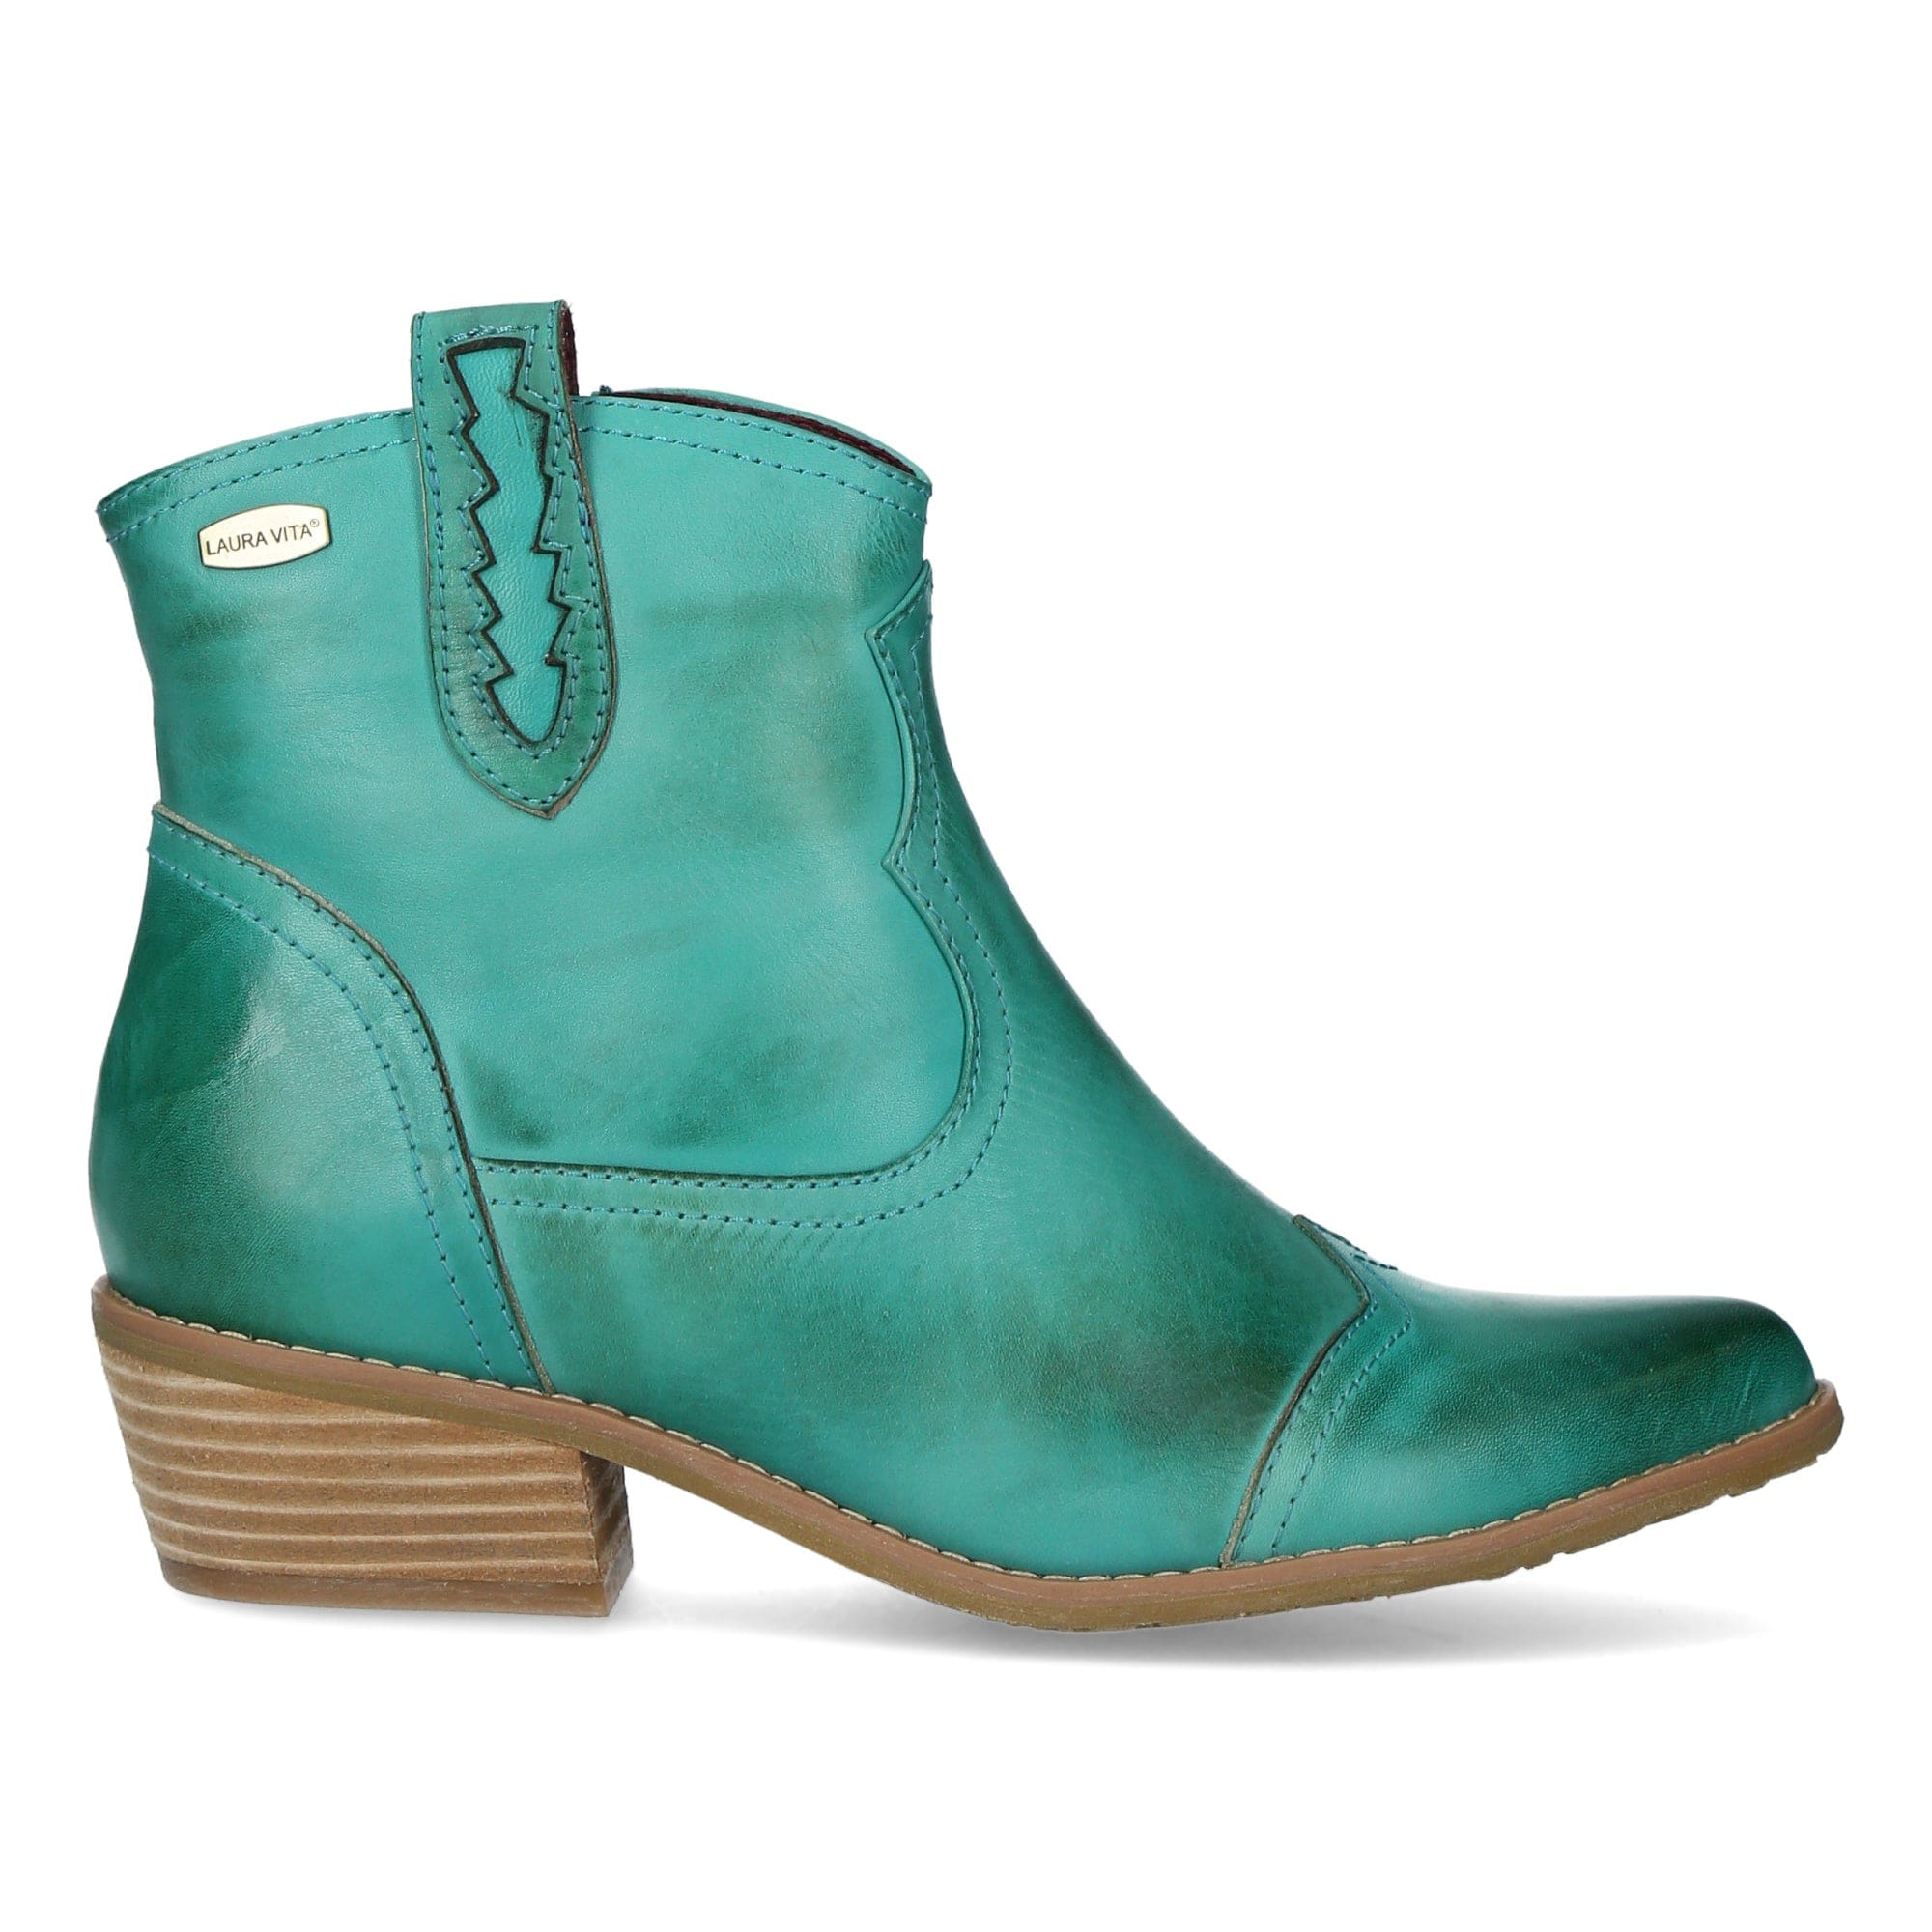 HICNIO 01H - 36 / Turquoise - Boots